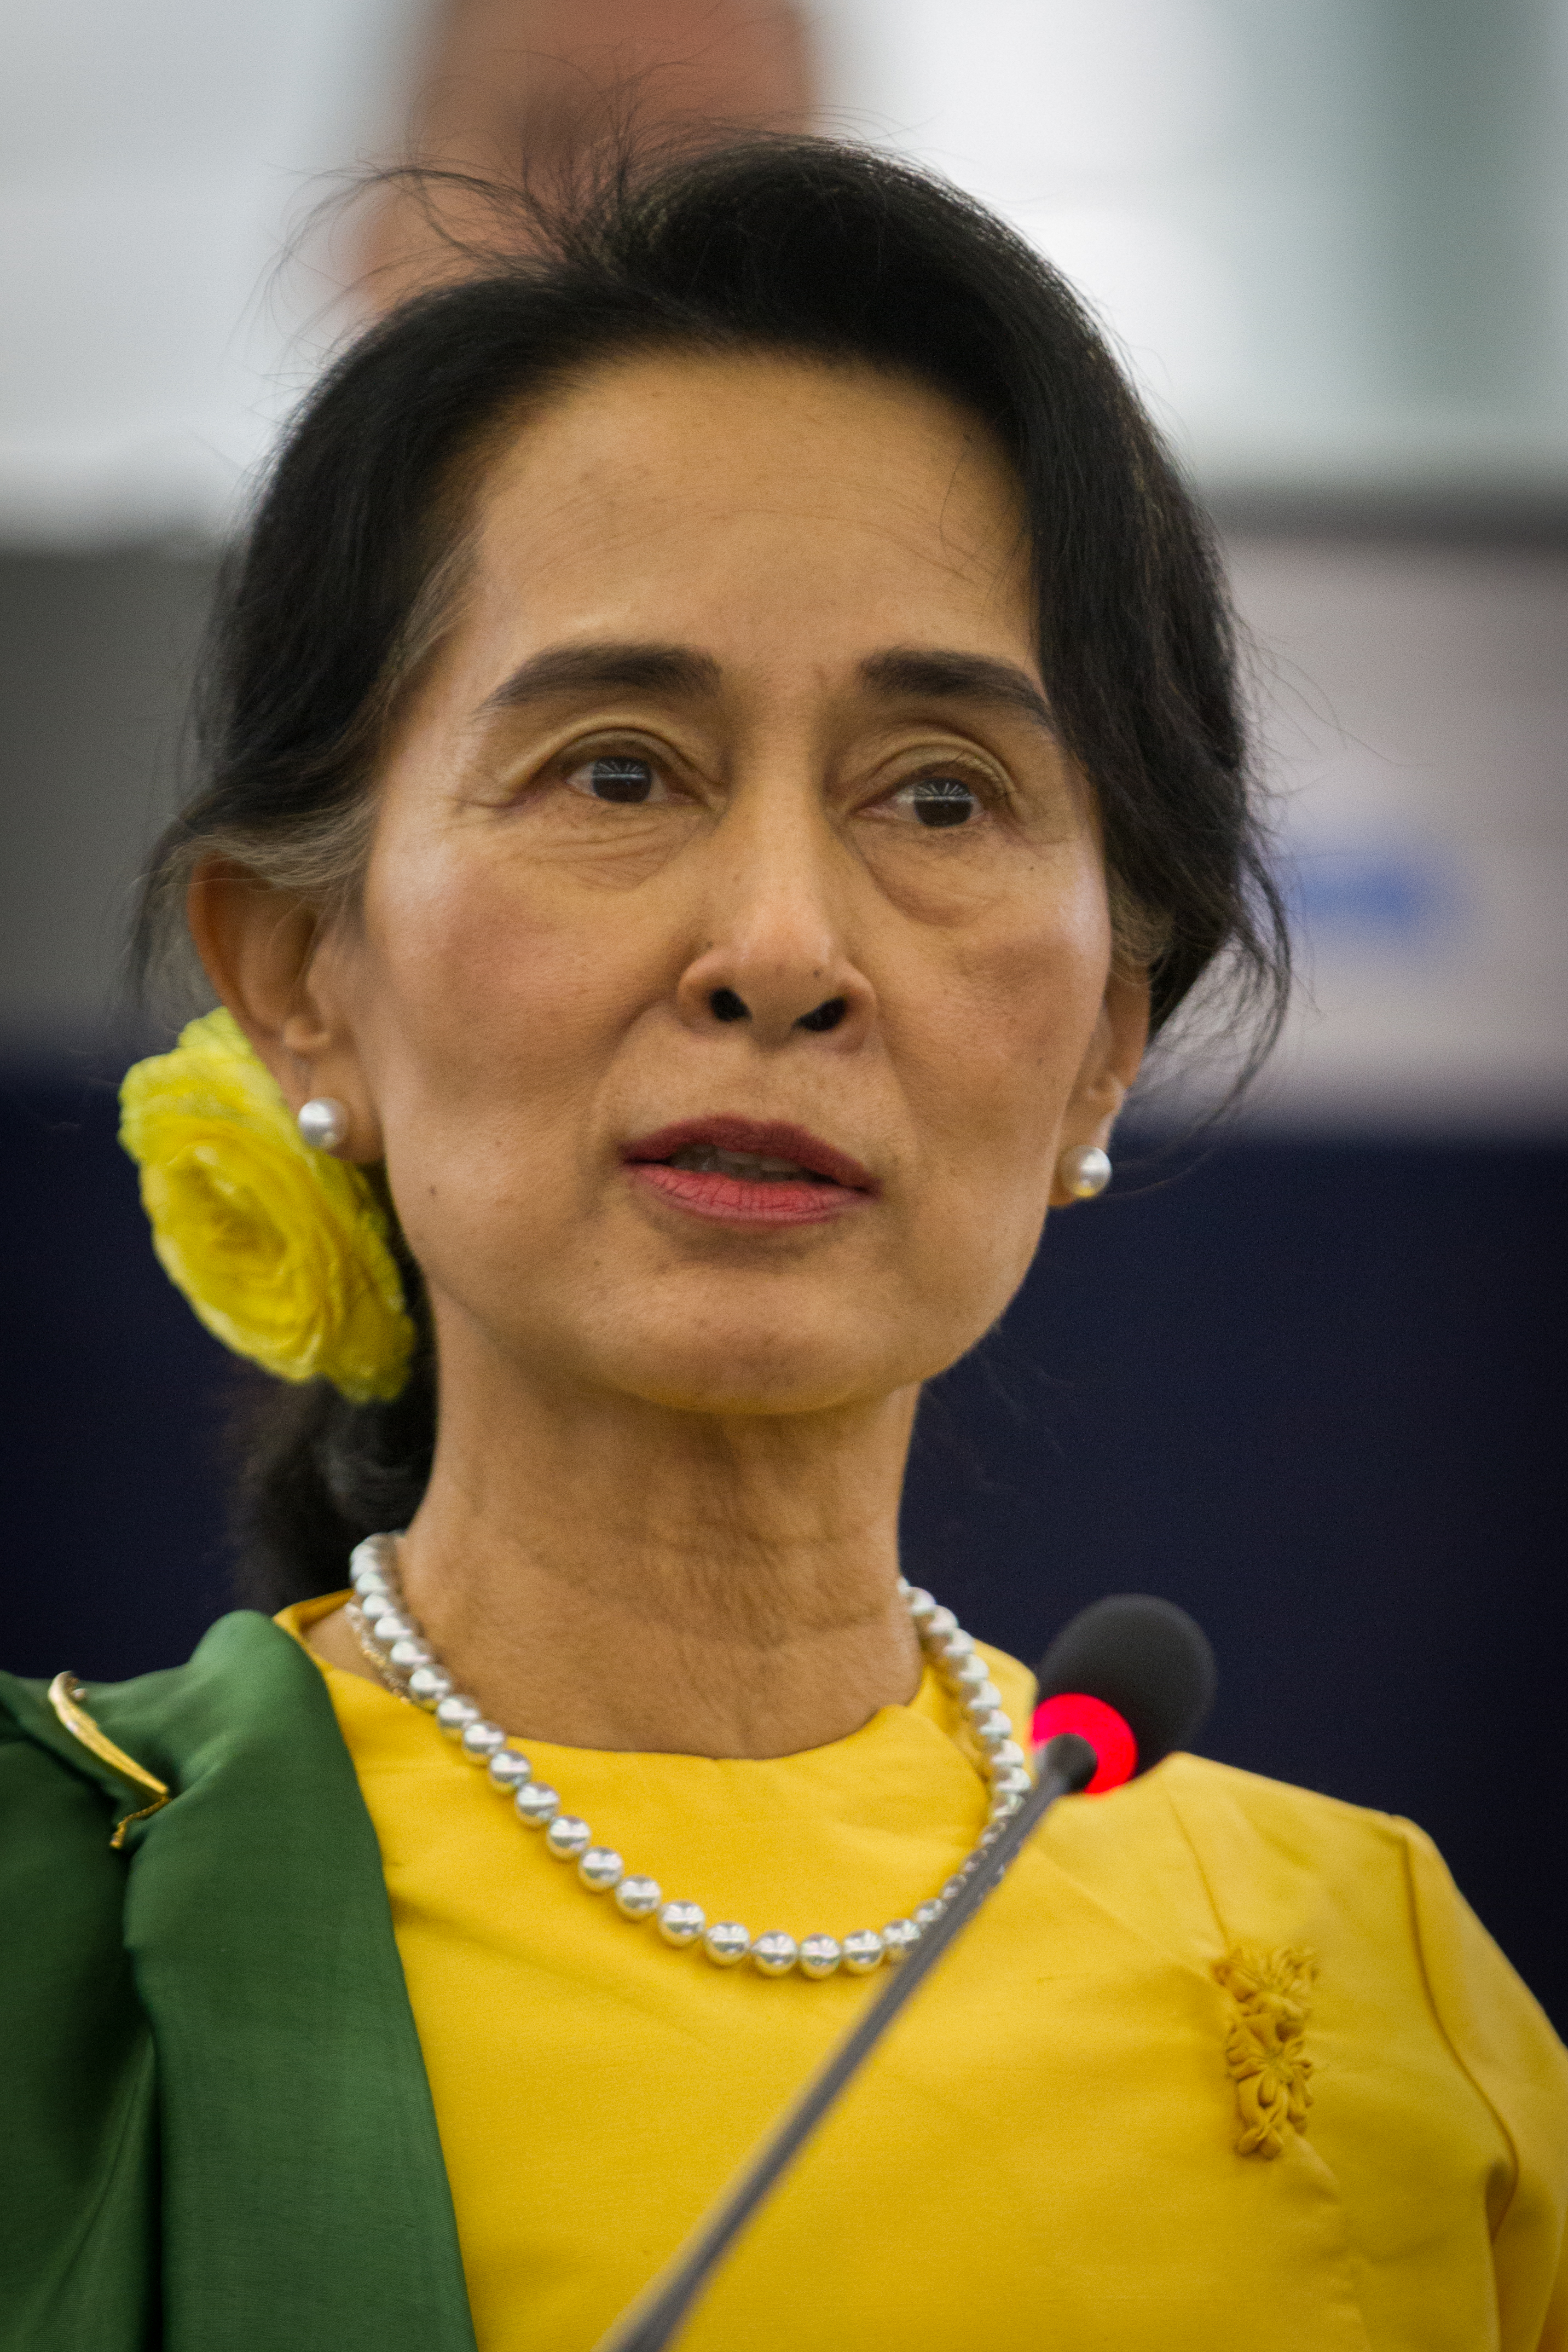 Aung San Suu Kyi in the European Parliament in Strasbourg, France, in October 2013